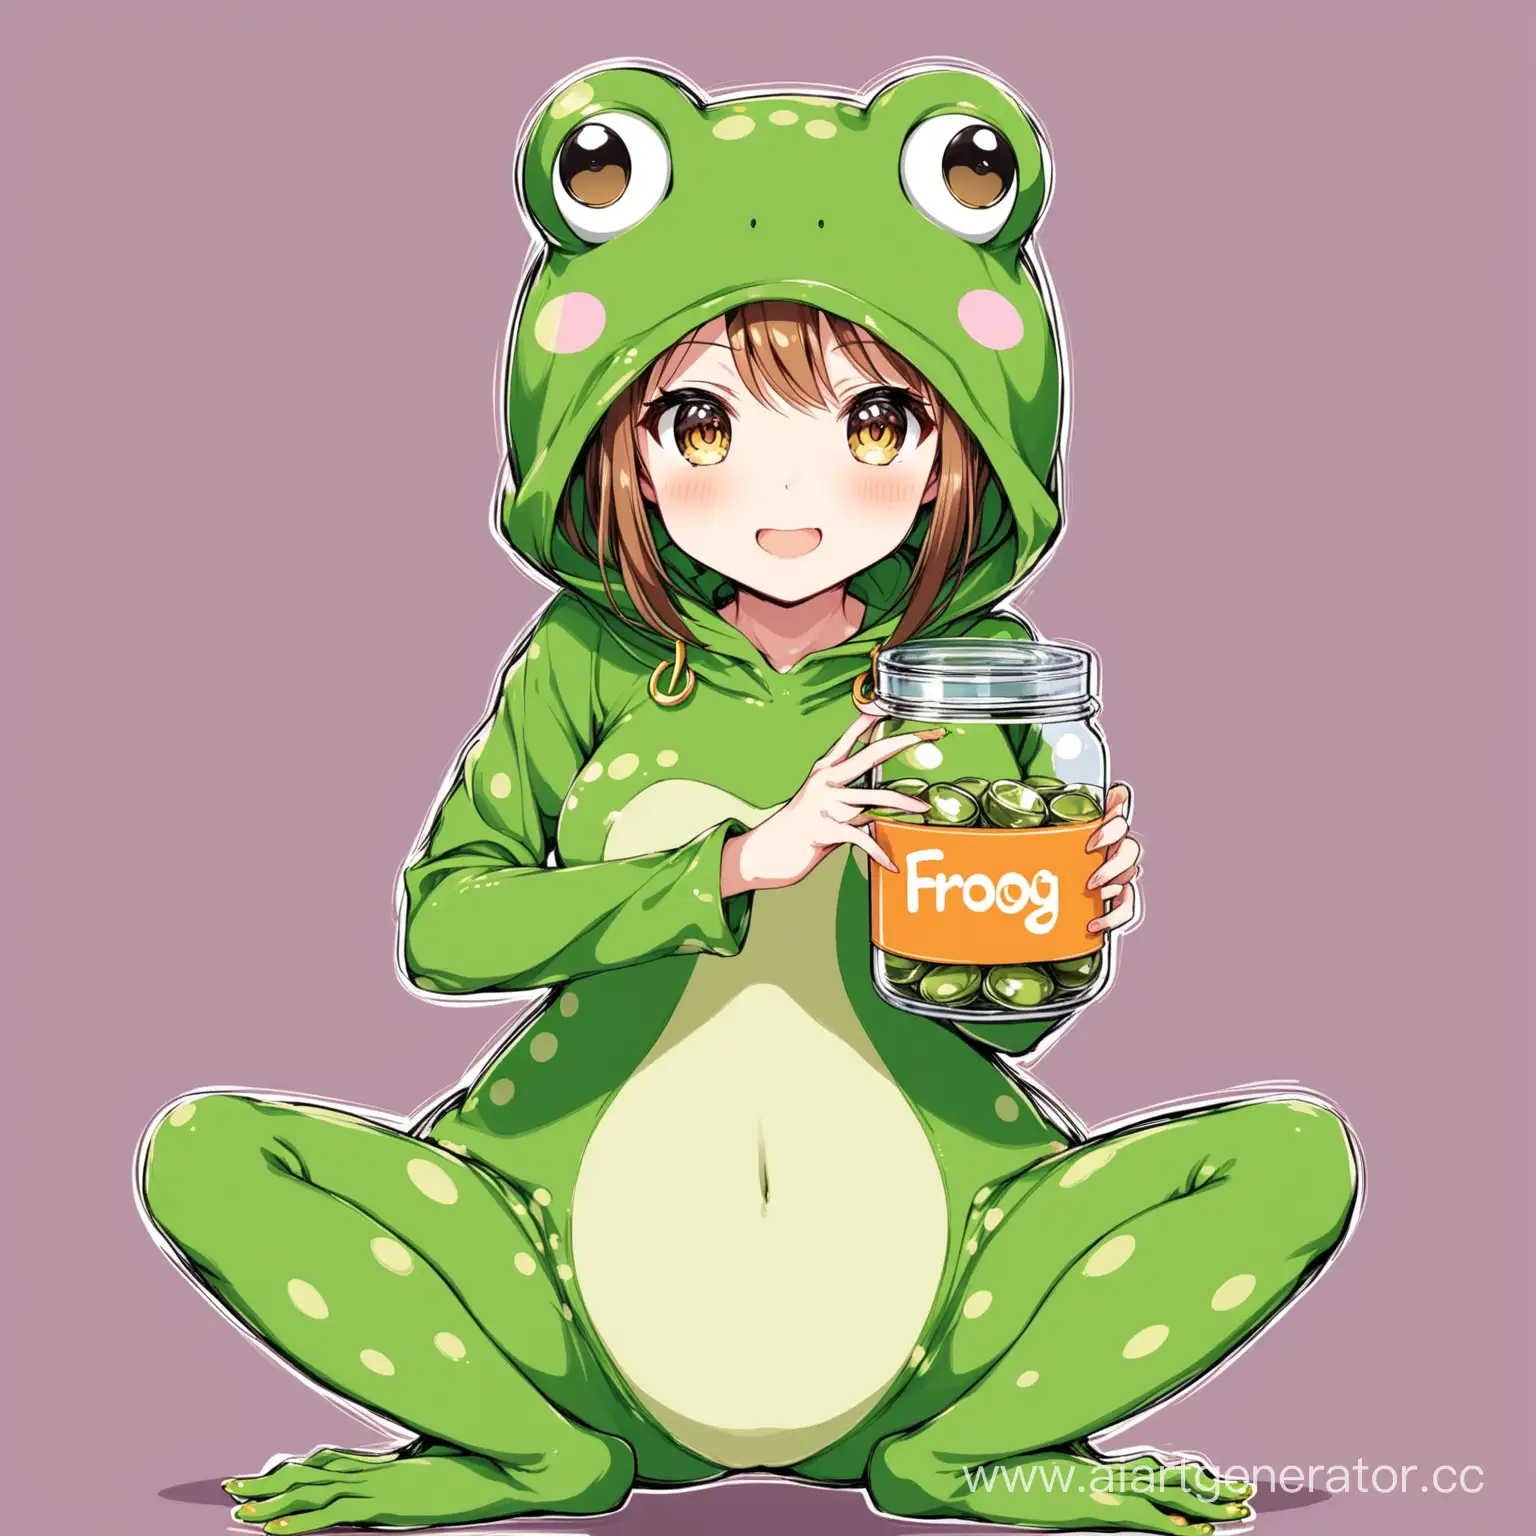 Cute-Anime-Girl-in-Frog-Costume-Holding-Donation-Jar